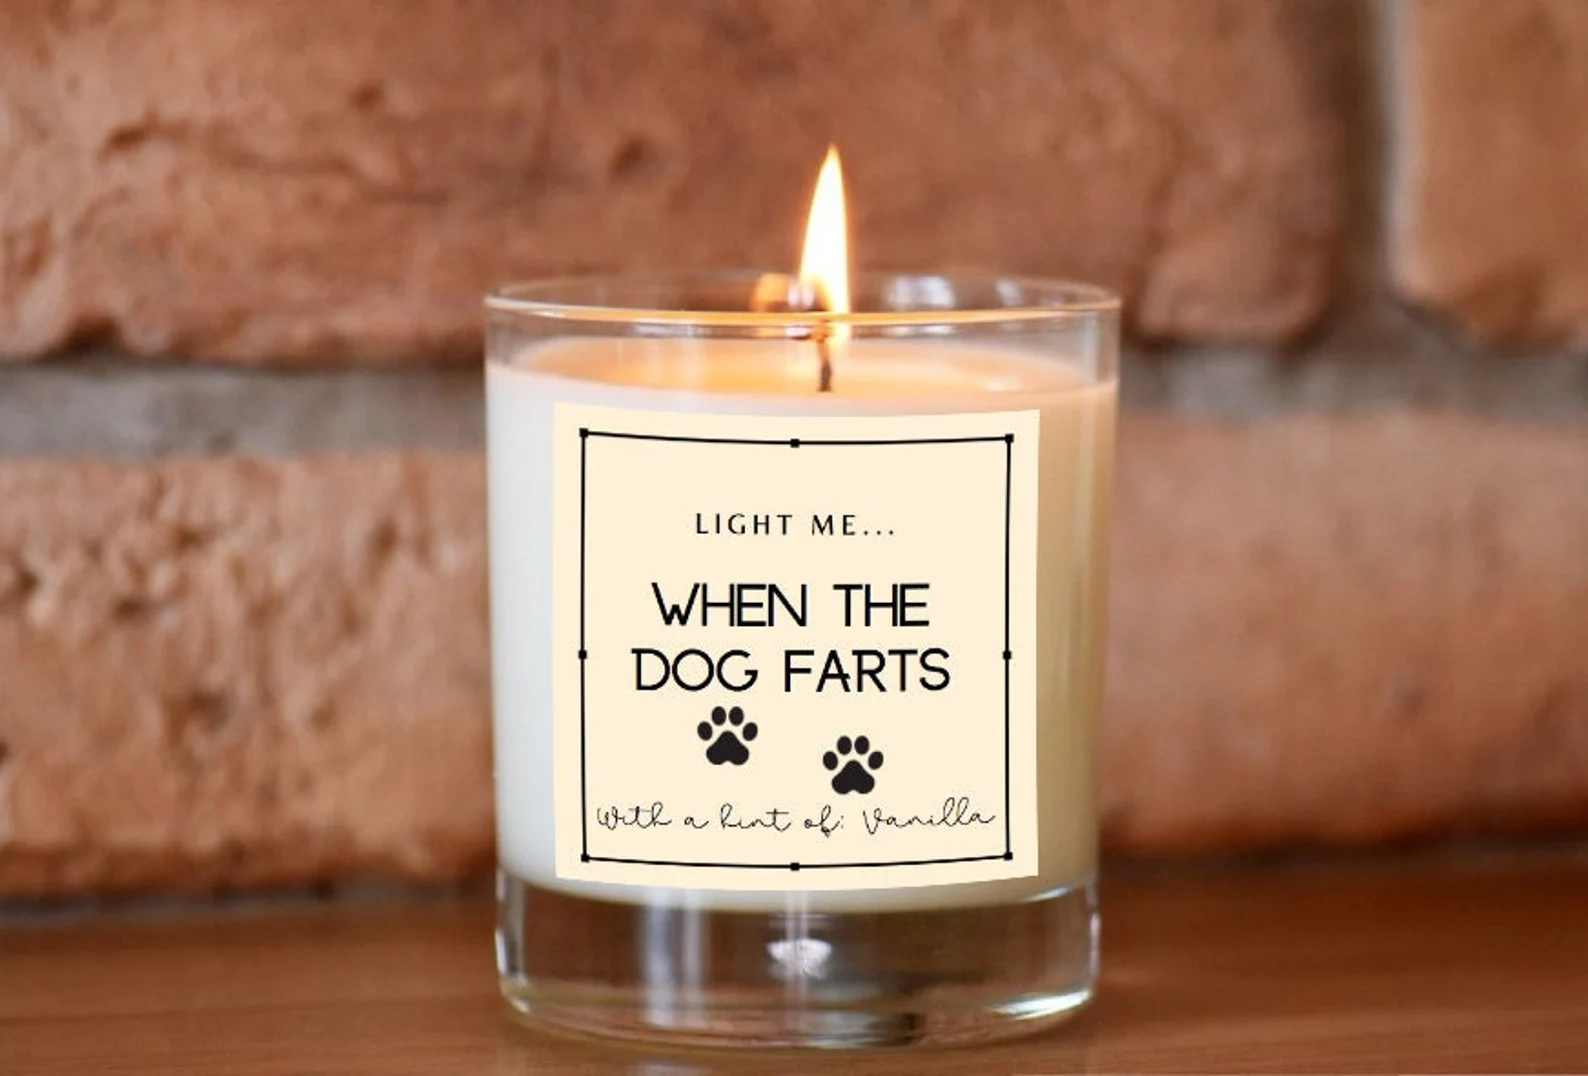 Light Me When The Dog Farts, Funny Candle